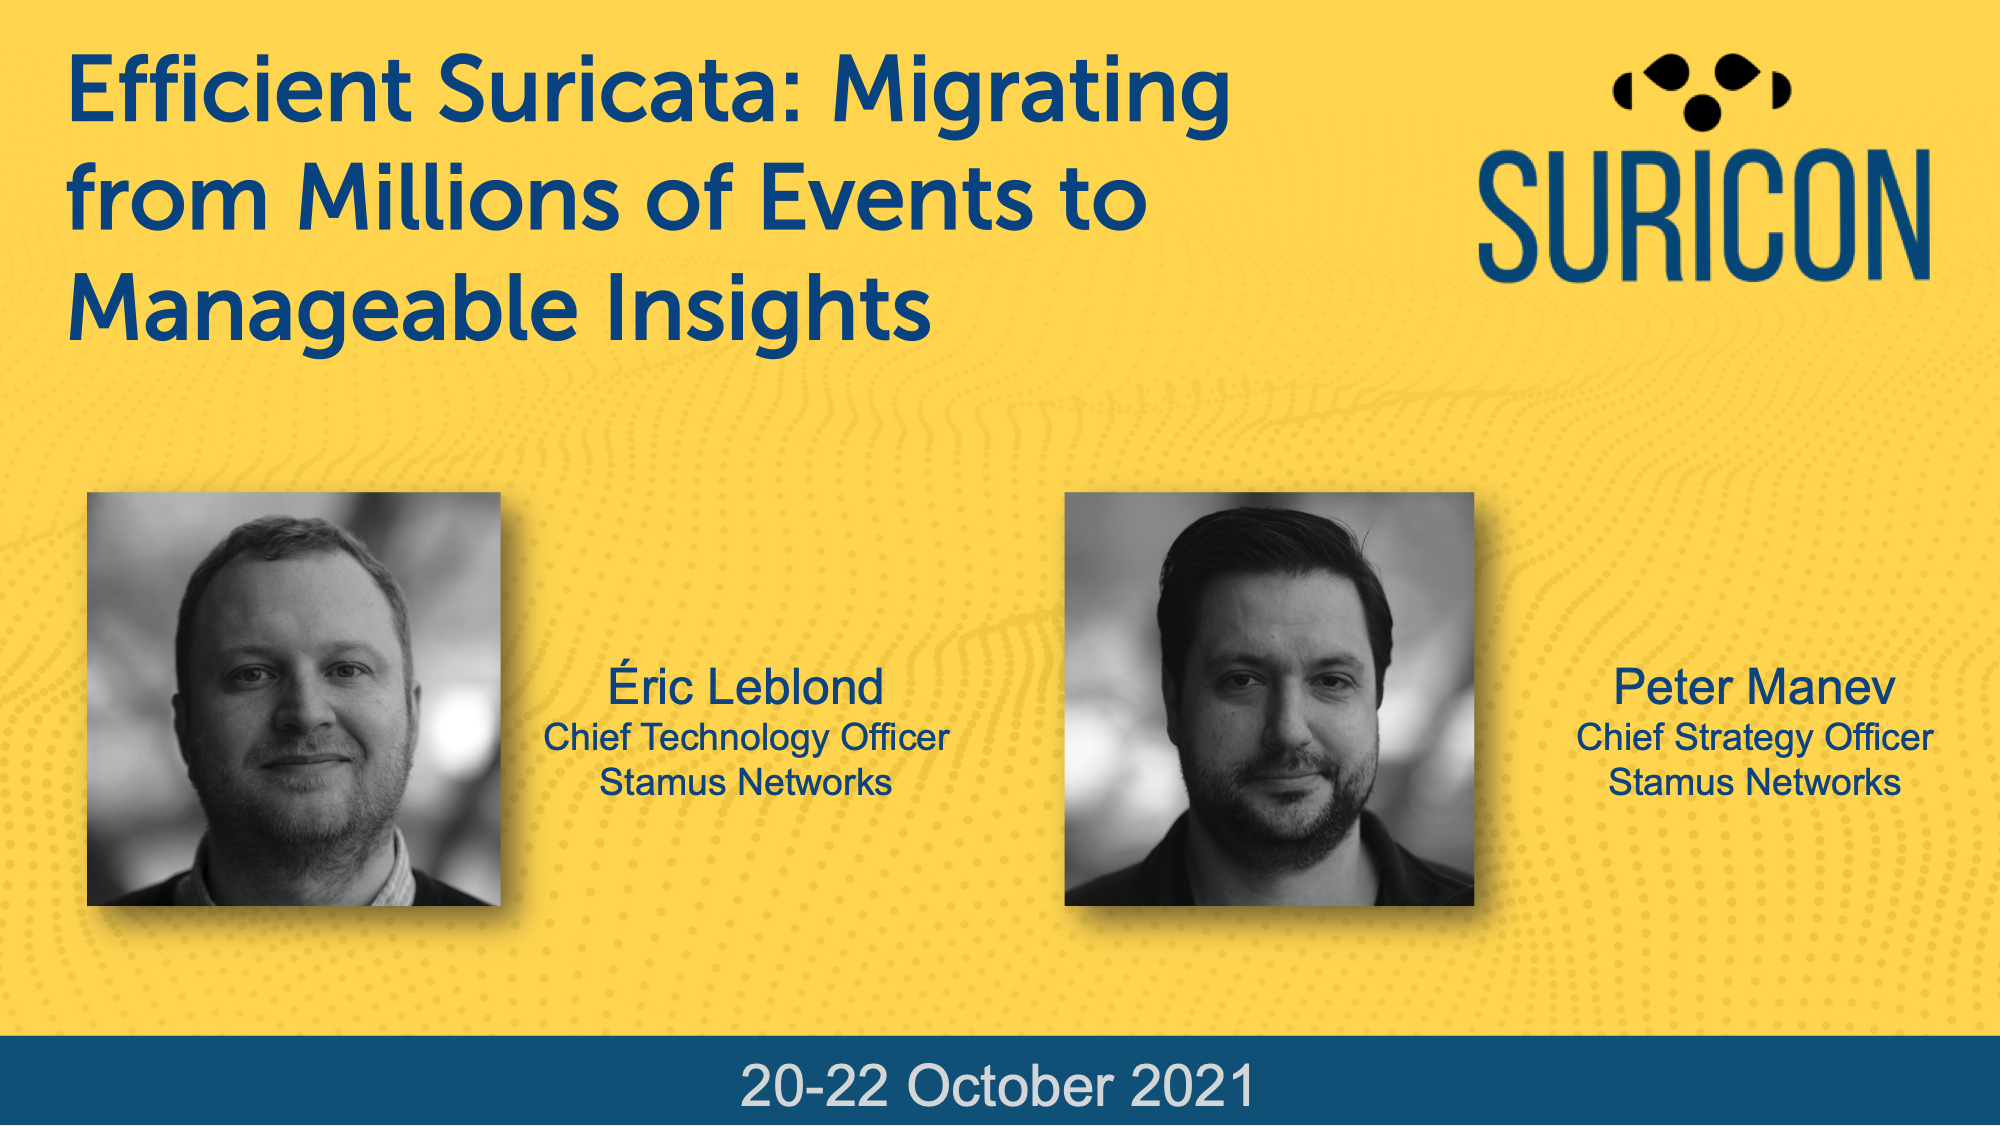 Efficient Suricata: Migrating from Millions of Events to Manageable Insights @ Suricon